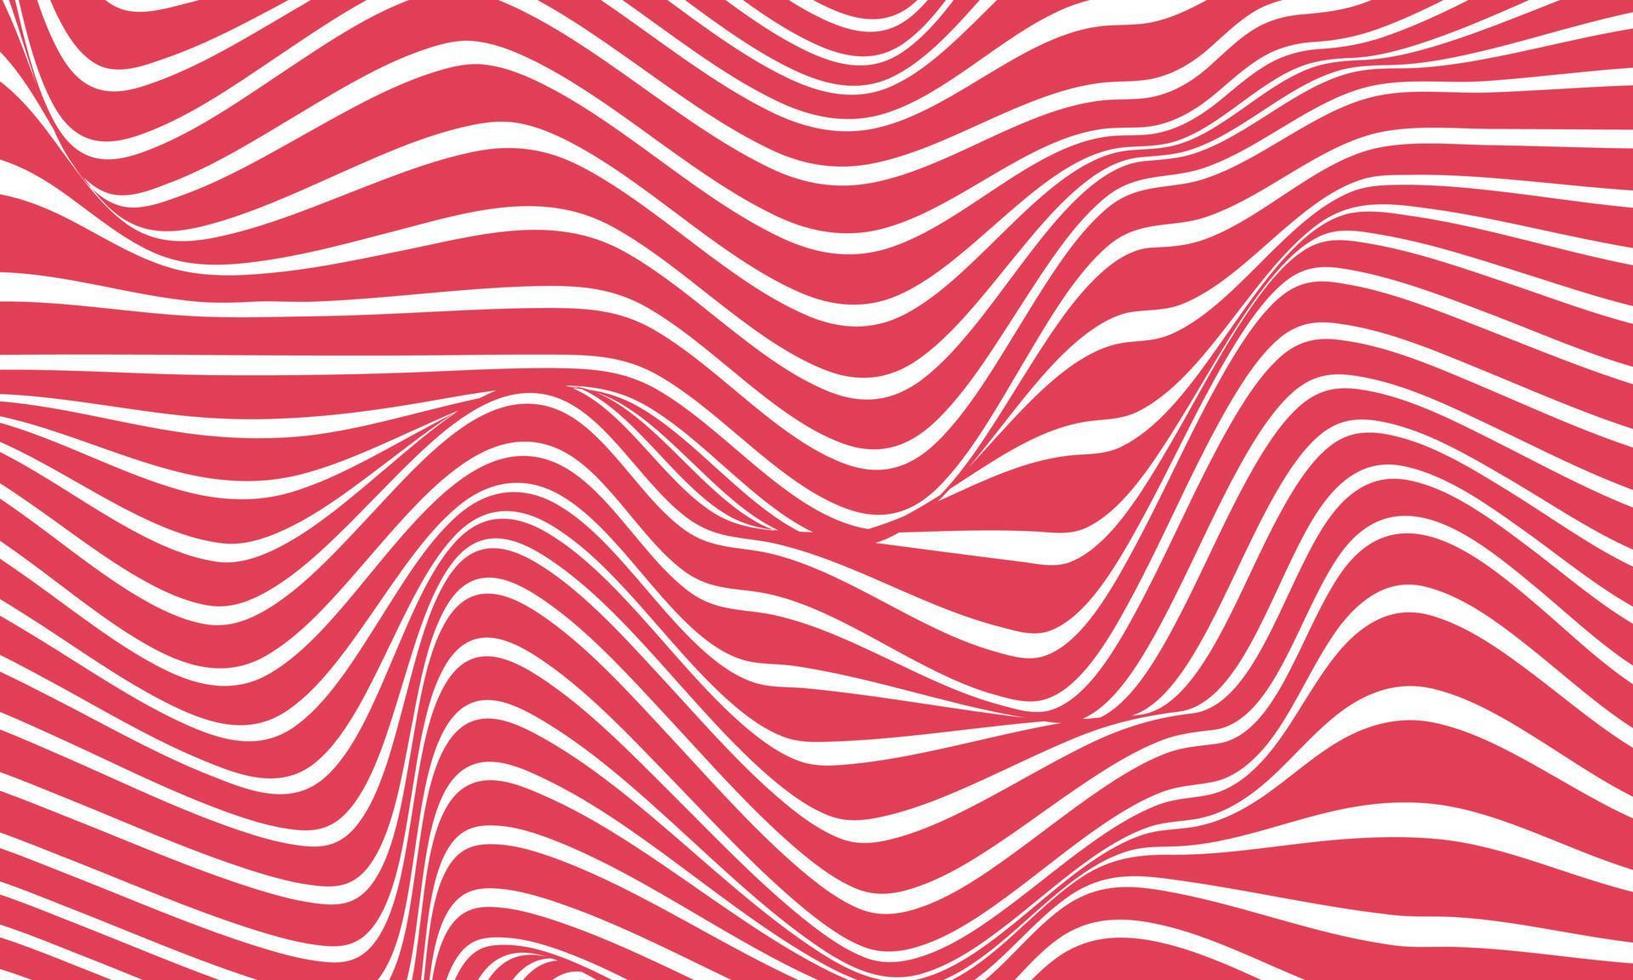 Abstract stripe background in red and white with wavy lines pattern. vector